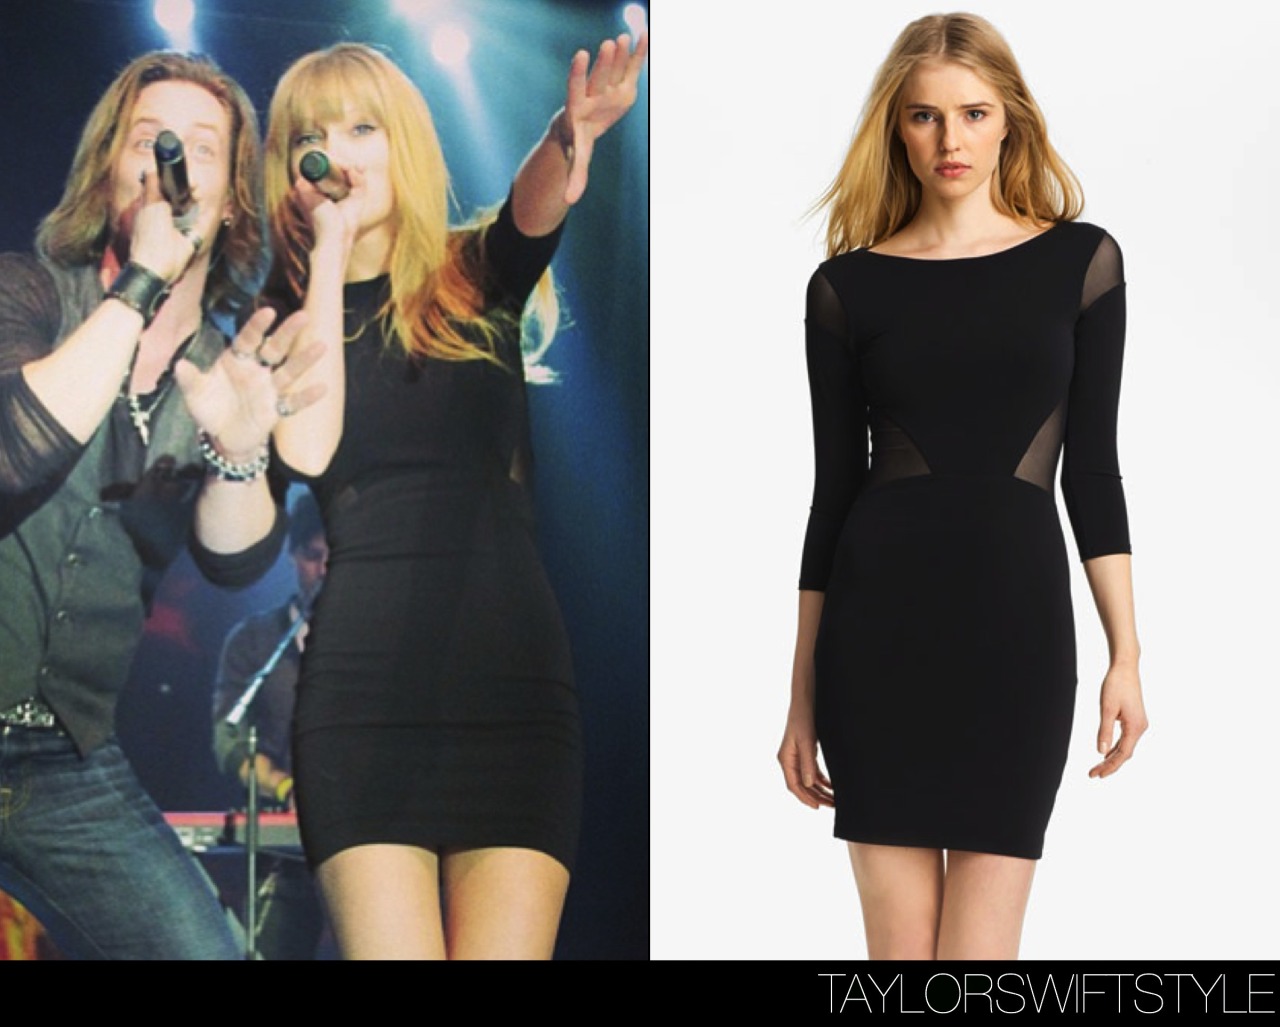 Performing &#8220;Cruise&#8221; with Florida Georgia Line | Nashville, TN | March 1, 2013Elizabeth &amp; James &#8216;Sheer Inset Dress&#8217; - $394.84 (CAD)Taylor wore yet another bodycon black dress with sheer mesh inserts by Elizabeth &amp; James. She wore a similar one while she was in London a few weeks ago performing on The Graham Norton Show.The band recently announced that they&#8217;ll be joining Taylor on select dates of The RED Tour this year.You can catch Taylor&#8217;s performance of the hit song &#8220;Cruise&#8221; with FGL here.Picture via thebootdotcom (Instagram)